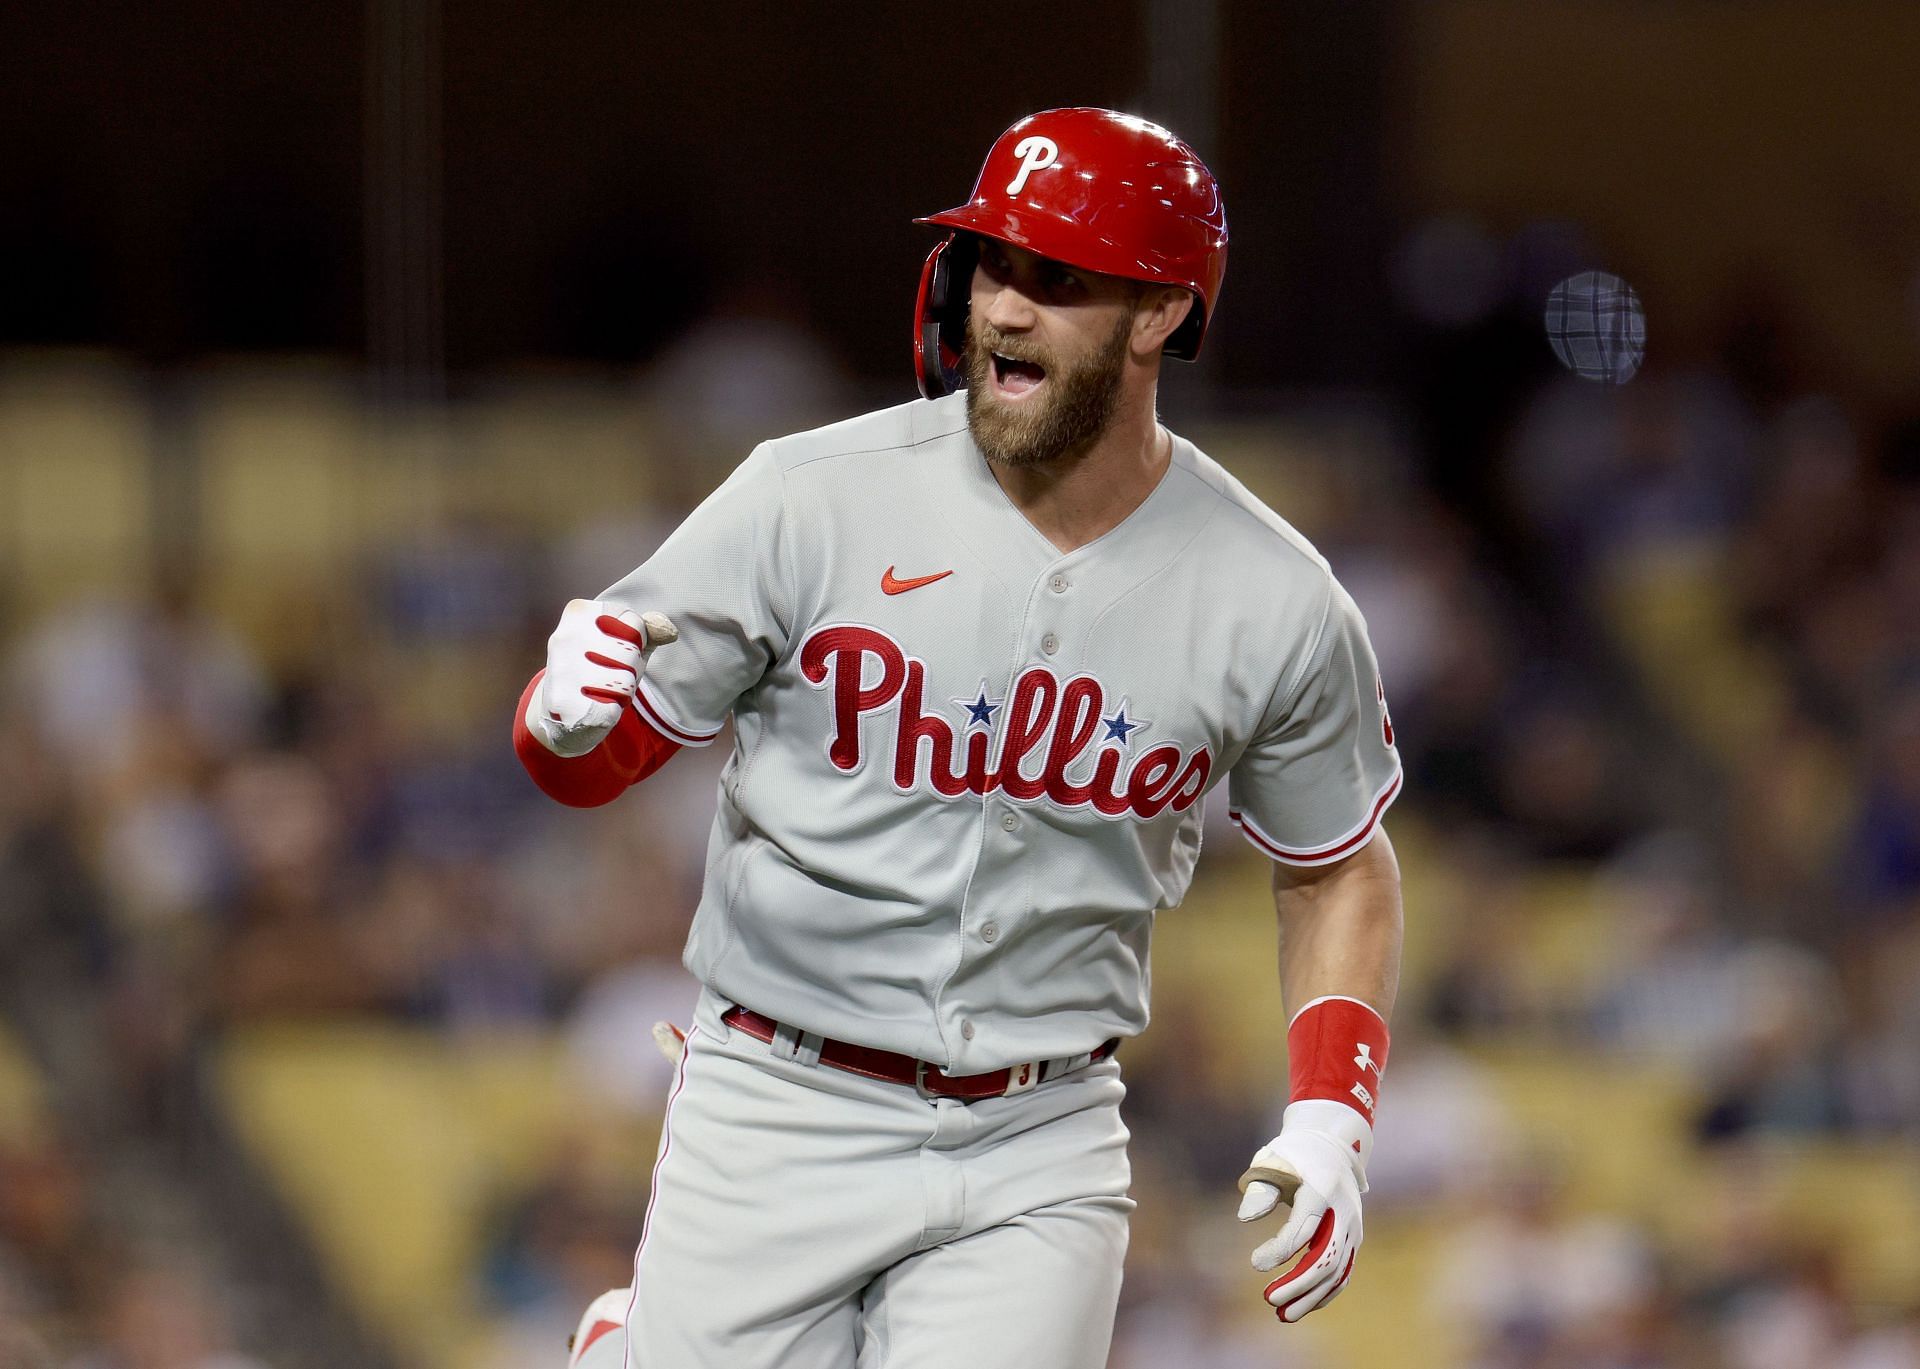 Reigning MVP Bryce Harper is off to a sensational start this MLB season